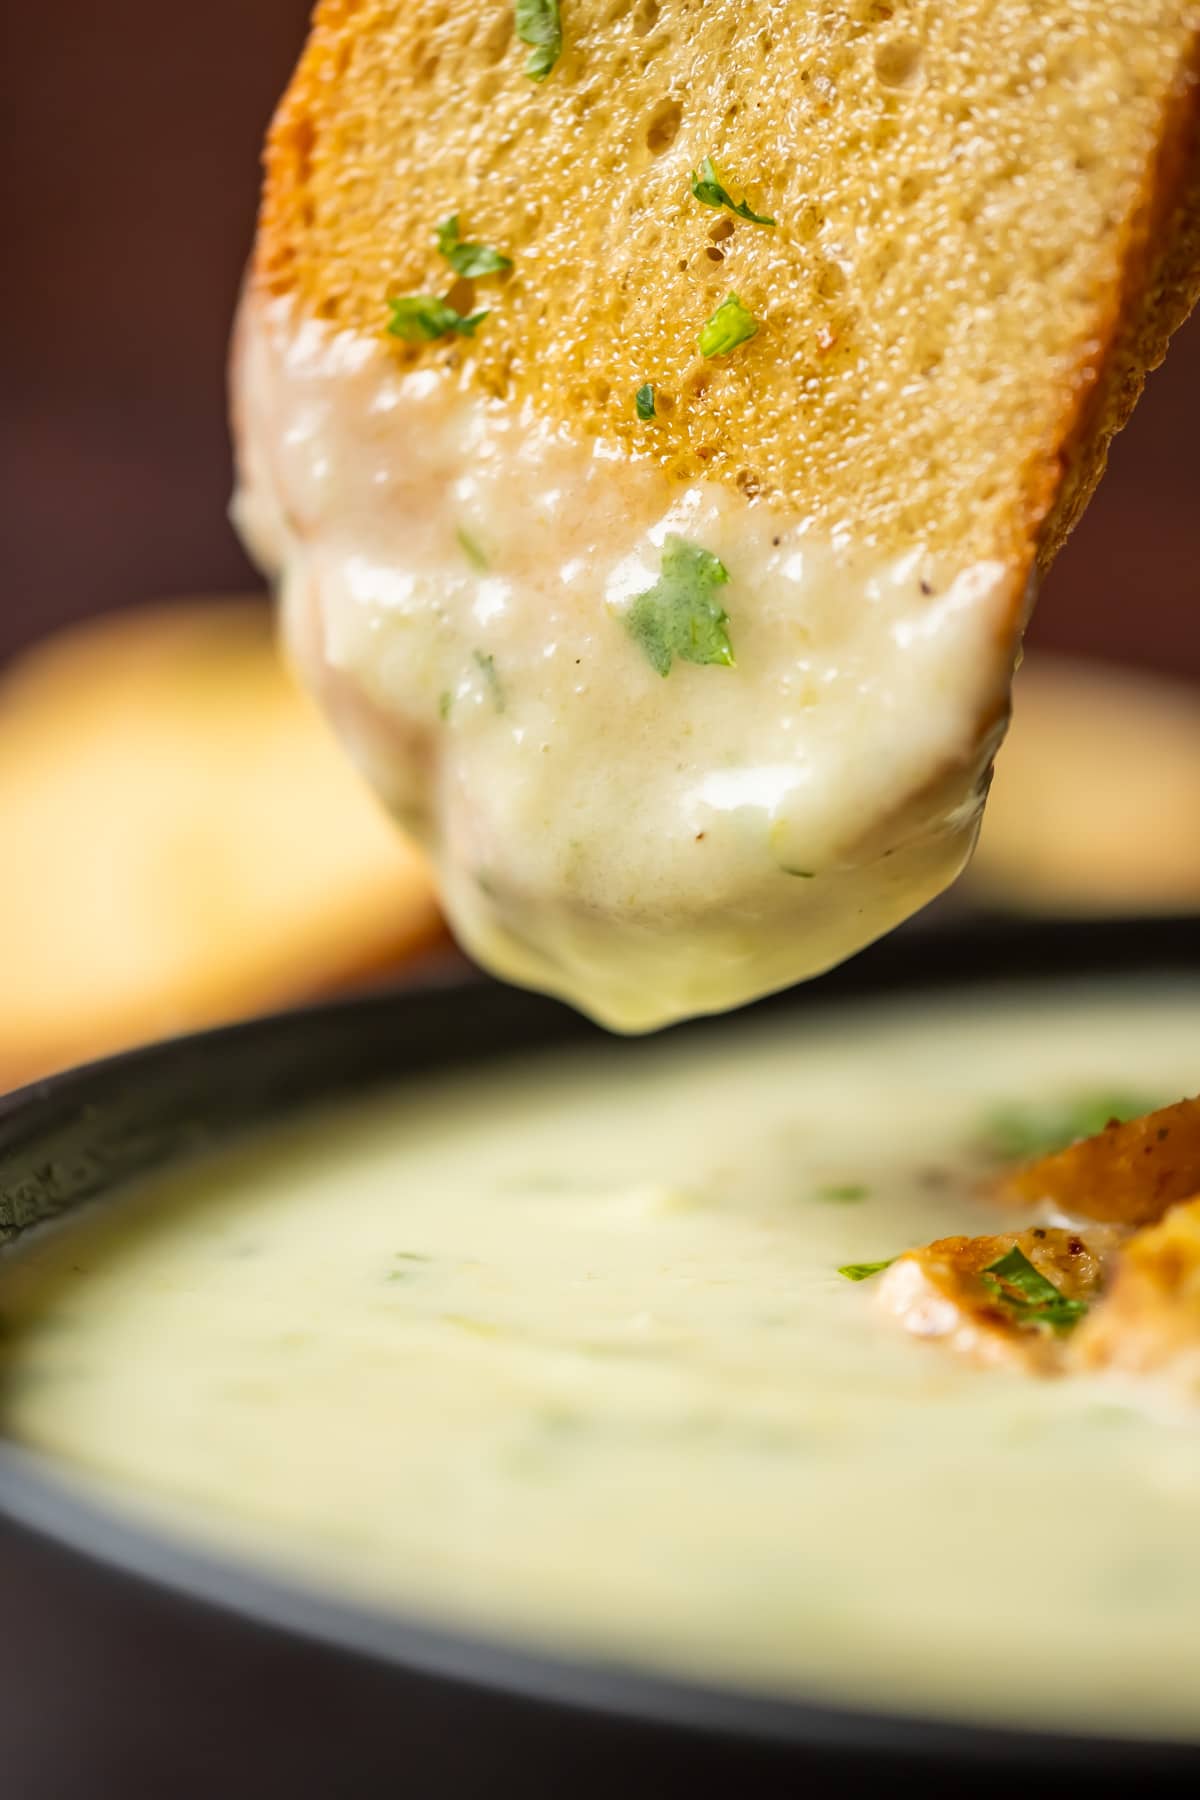 Slice of toasted bread dipping into celery soup.